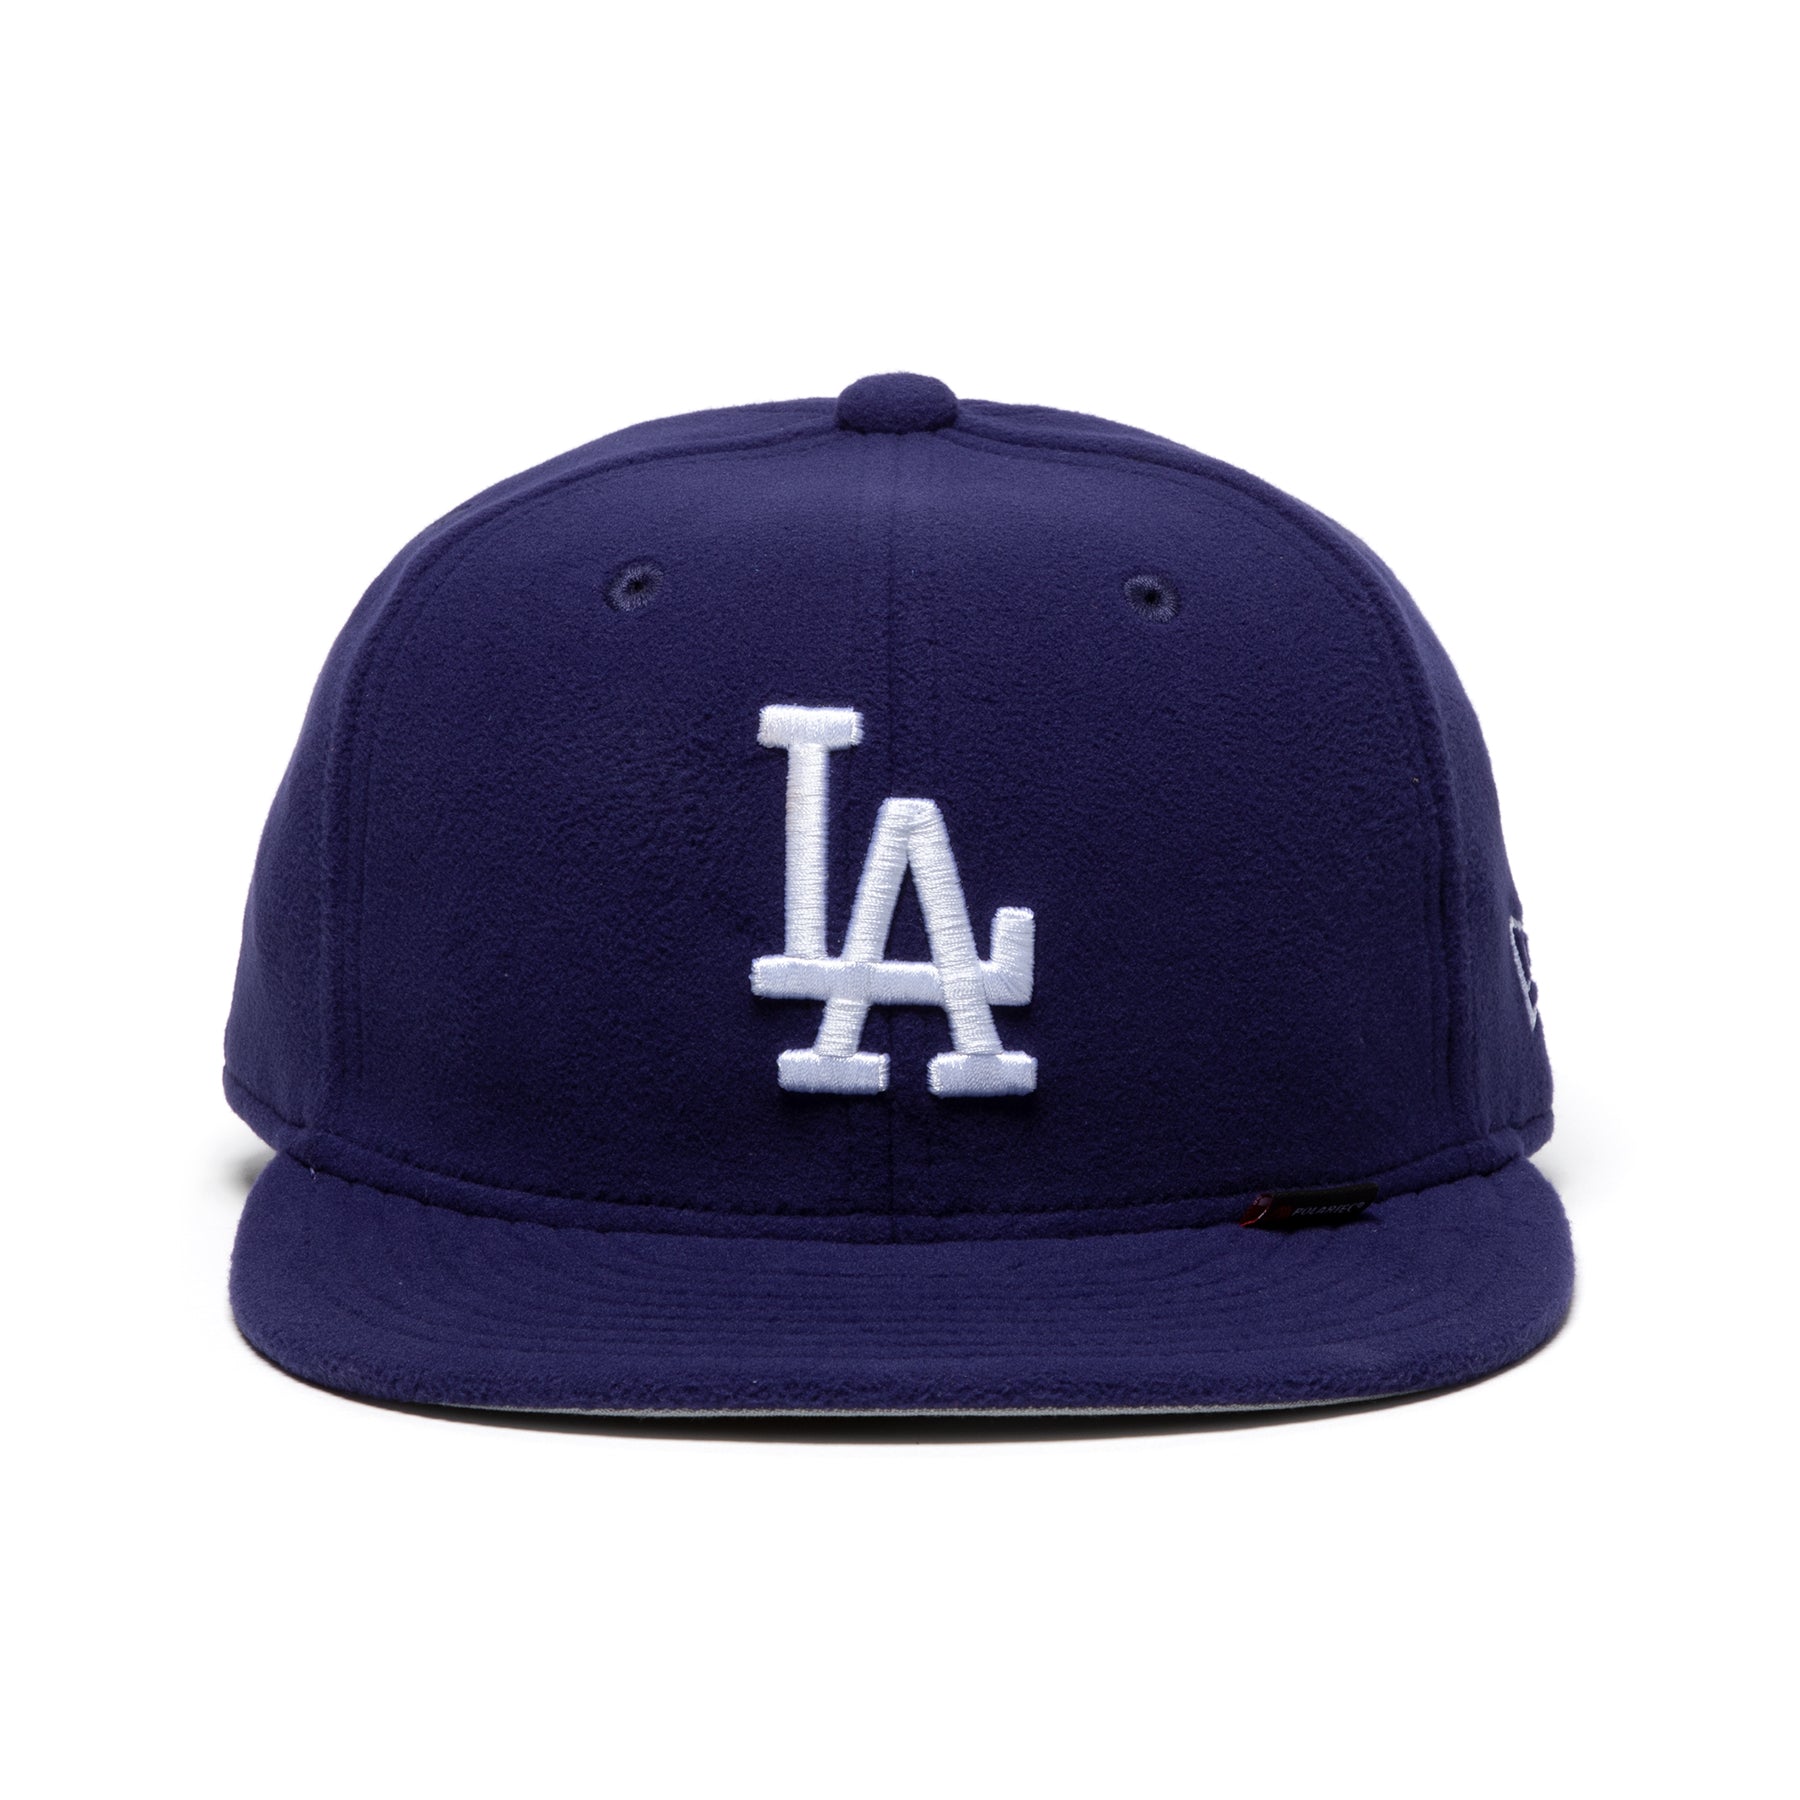 L.A navy blue fitted cap - All Over Logo 5950 Low Profile LA New Era :  Headict